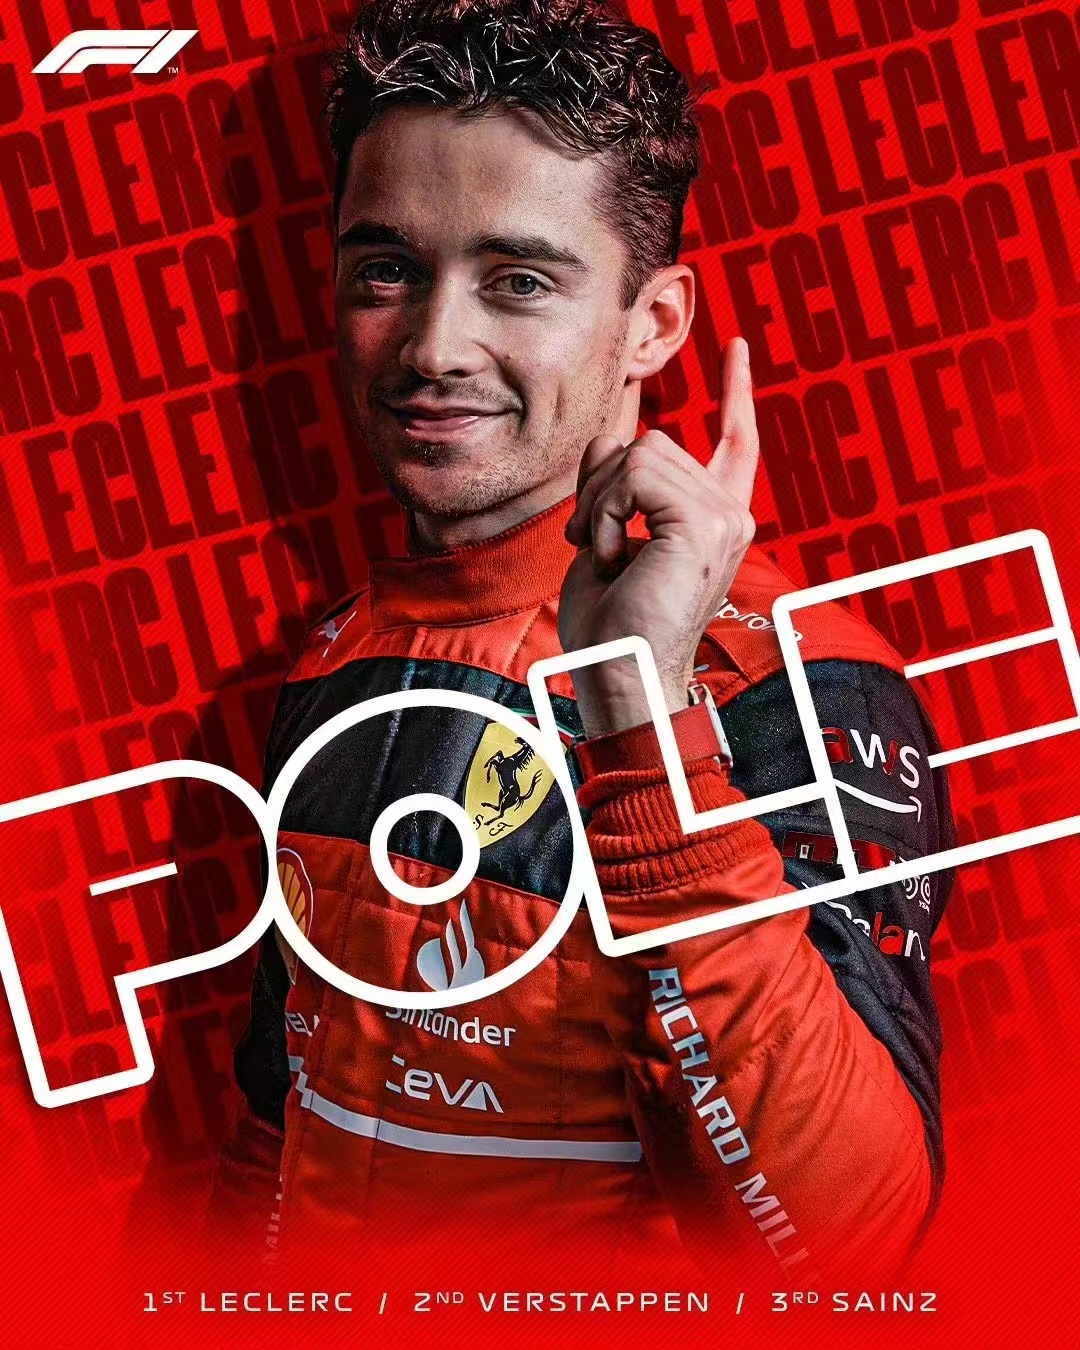 F1 Italian qualifying Leclerc takes pole at home and Verstappen will